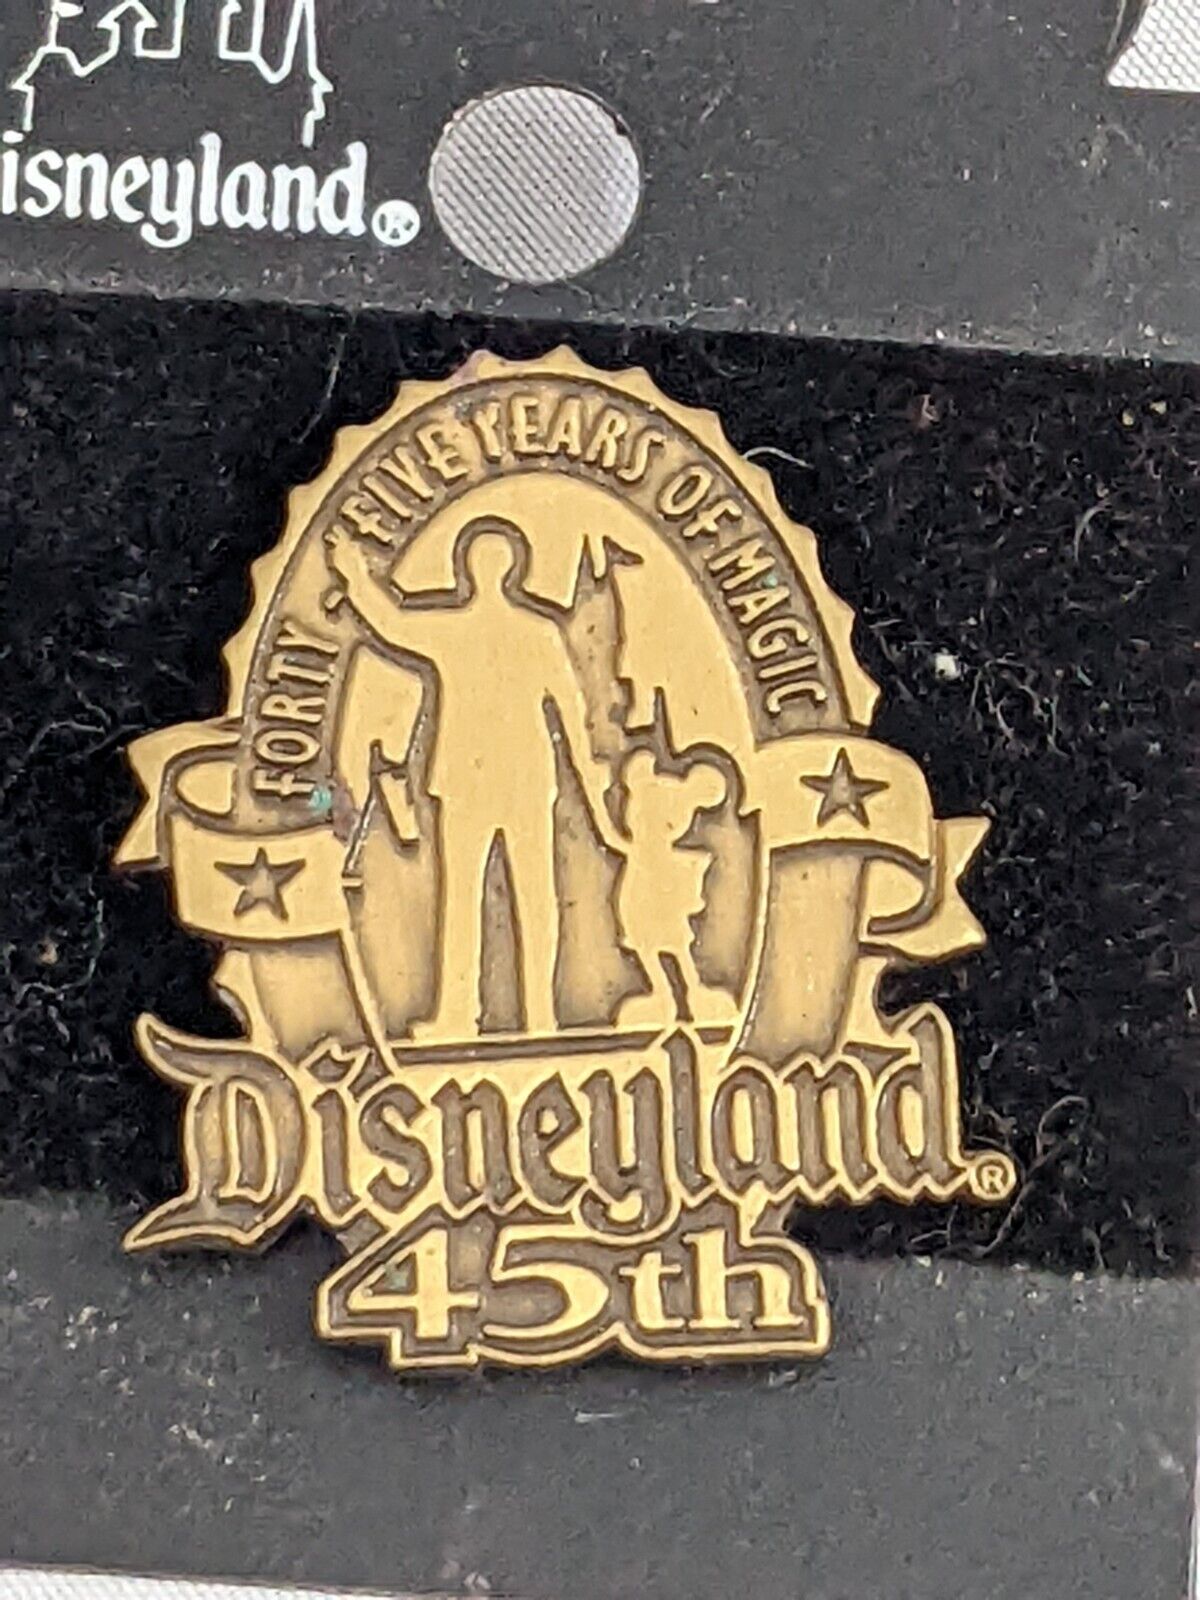 Disneyland 45th Forty-five Years of Magic Lapel Pin Badge Gold Plated